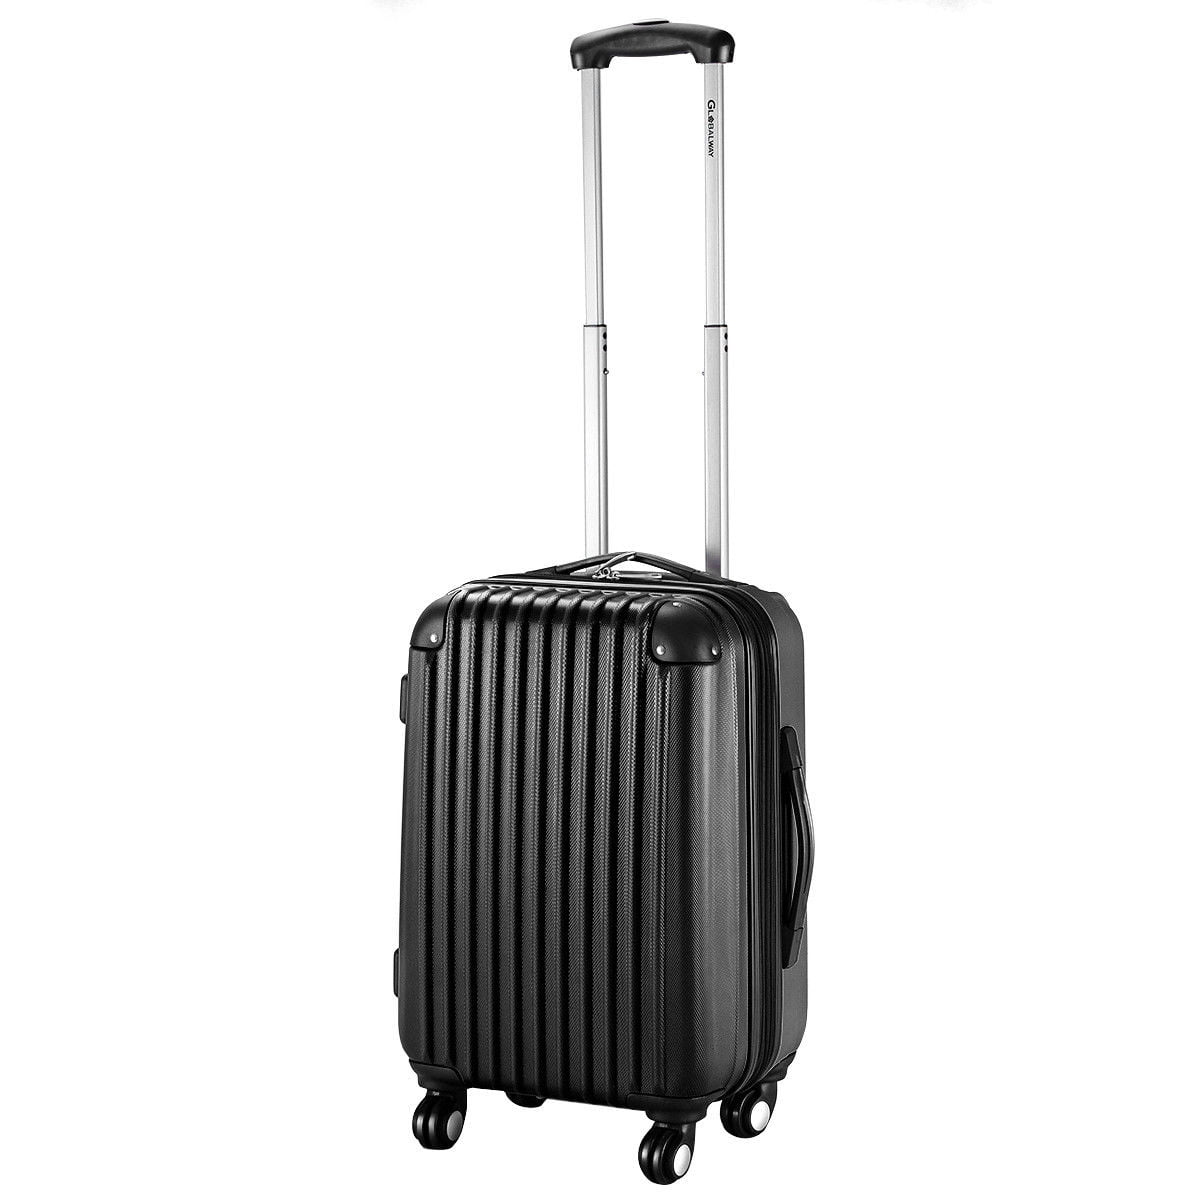 Black 20&quot; Expandable ABS Carry On Luggage Travel Bag Trolley Suitcase | Walmart Canada